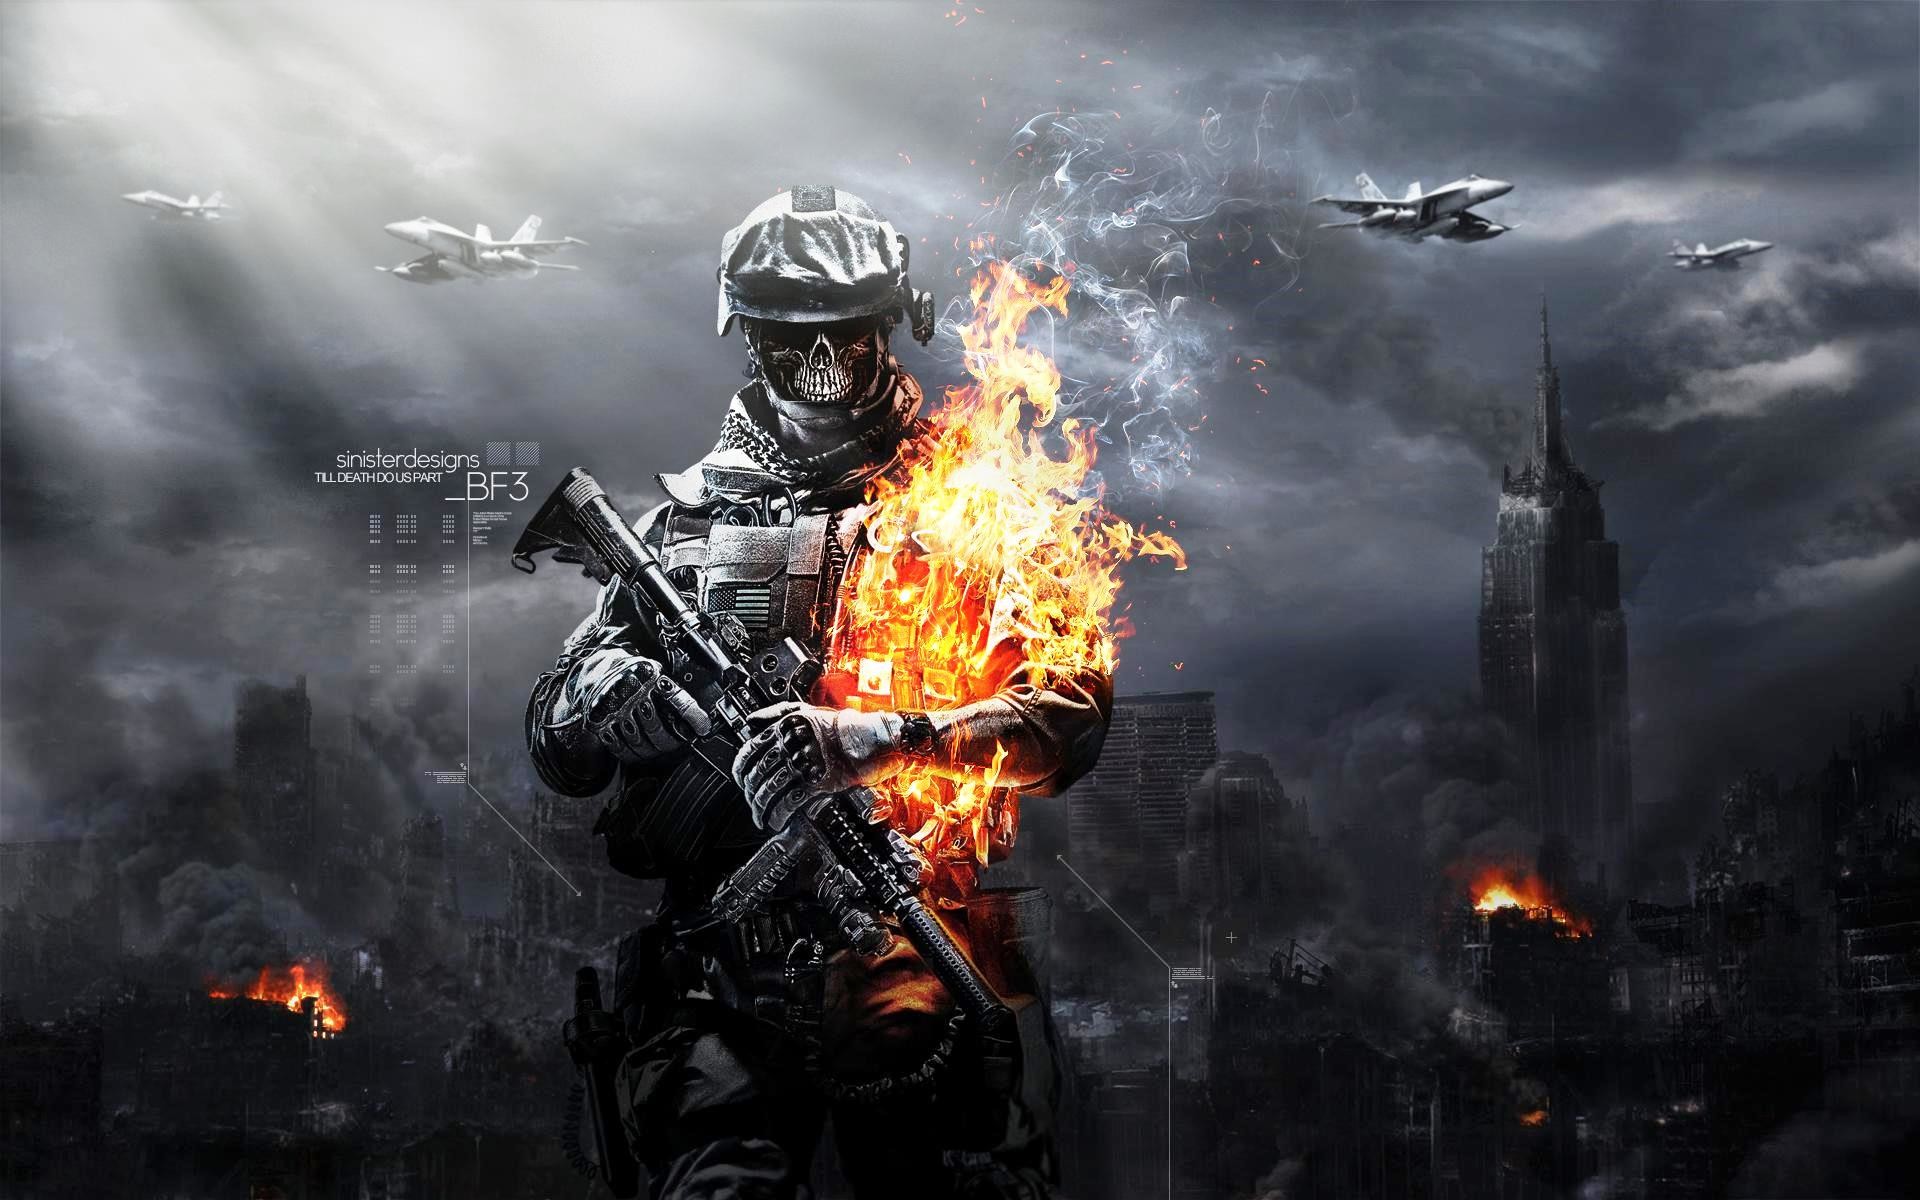 1920x1200, Cool Army Wallpaper High Quality Resolution - Gaming Wallpapers For Laptop 4k - HD Wallpaper 